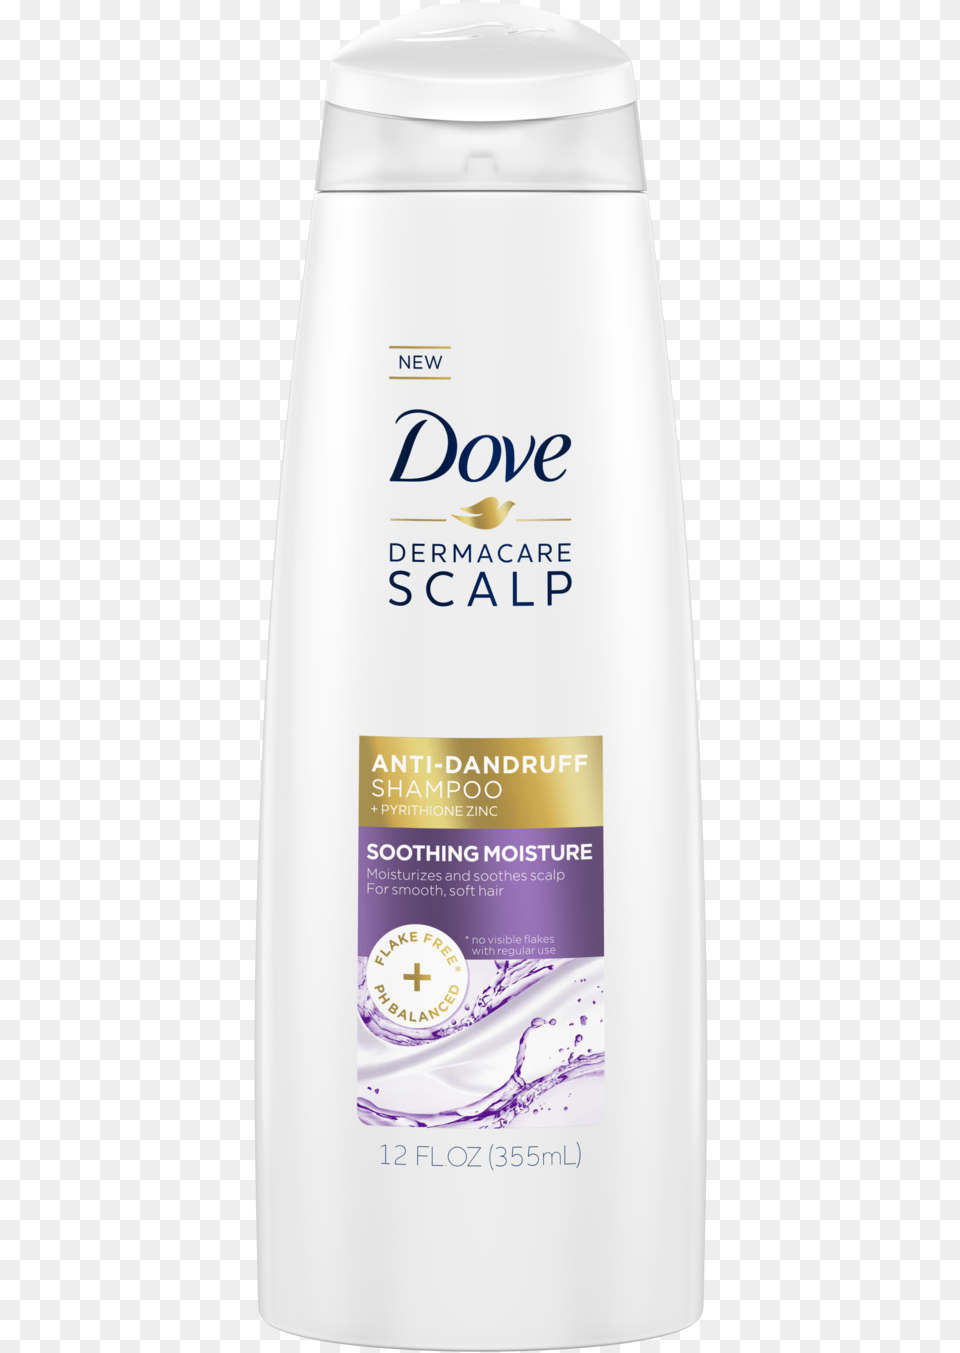 Dove Dermacare Scalp Soothing Moisture Anti Dandruff 1 Dove Dermacare Scalp Anti Dandruff Shampoo, Bottle, Cosmetics, Perfume Png Image